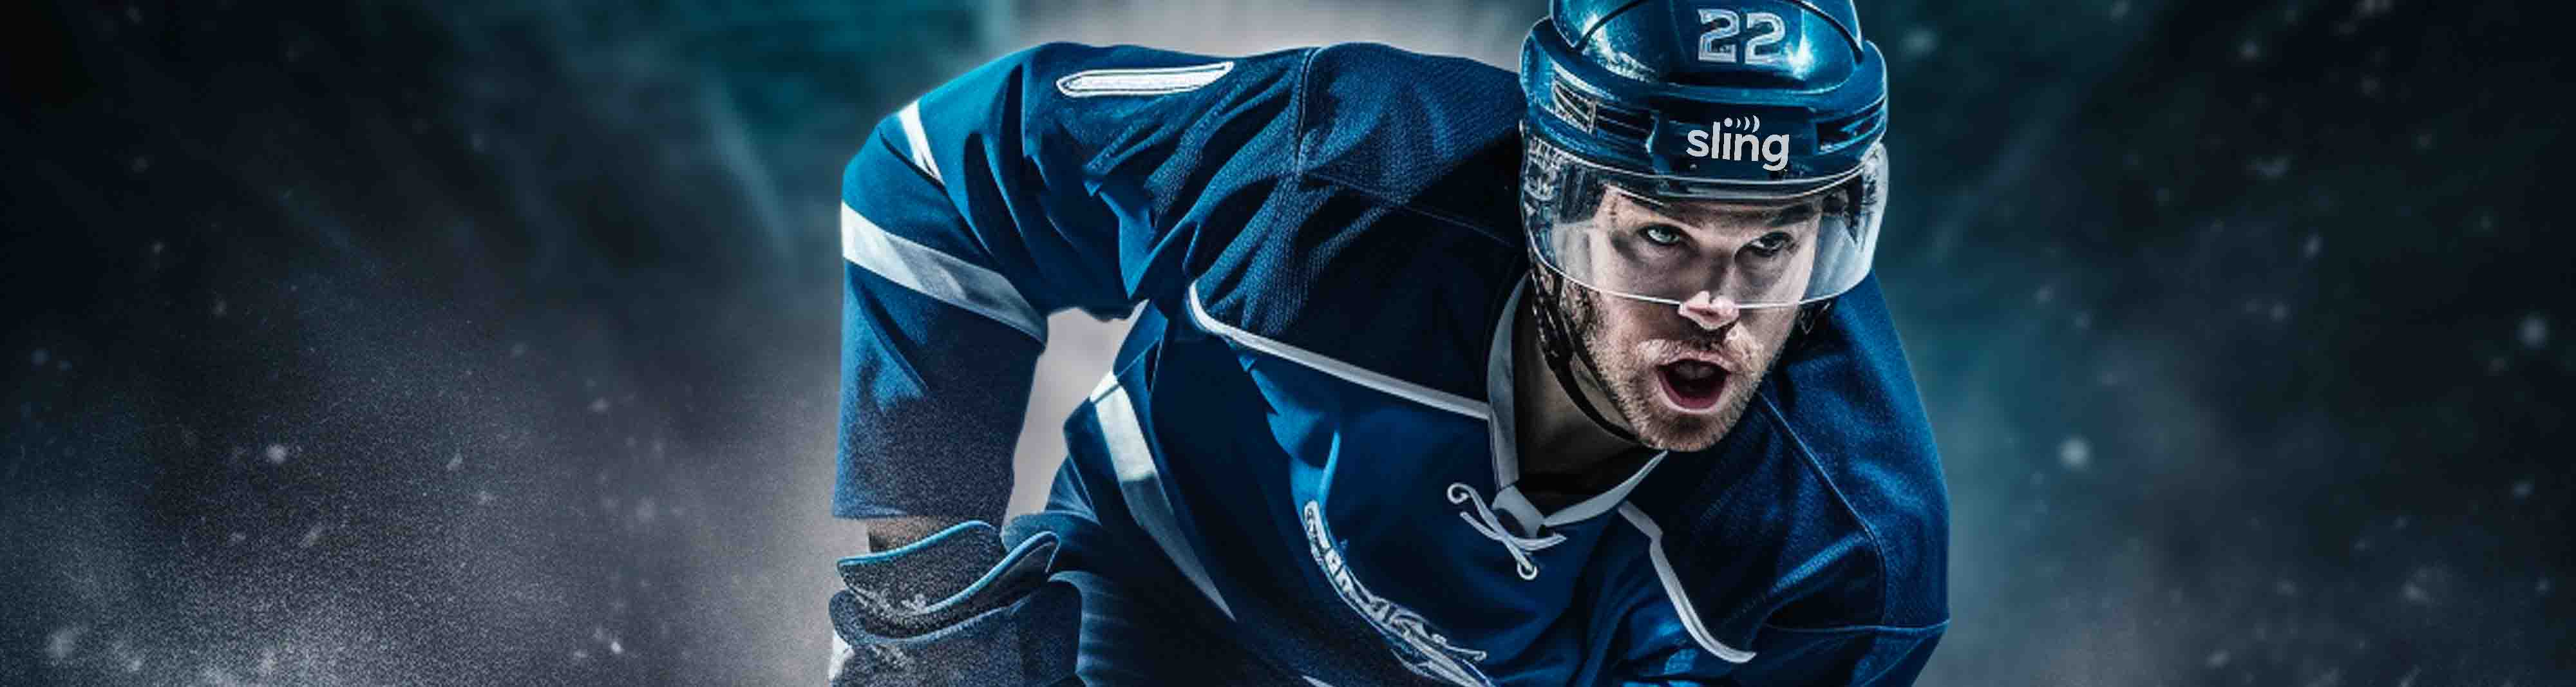 2023 Stanley Cup Playoffs presented by GEICO Second Round Begins Tuesday  with ESPN Doubleheader featuring Panthers vs. Maple Leafs and Kraken vs.  Stars - ESPN Press Room U.S.